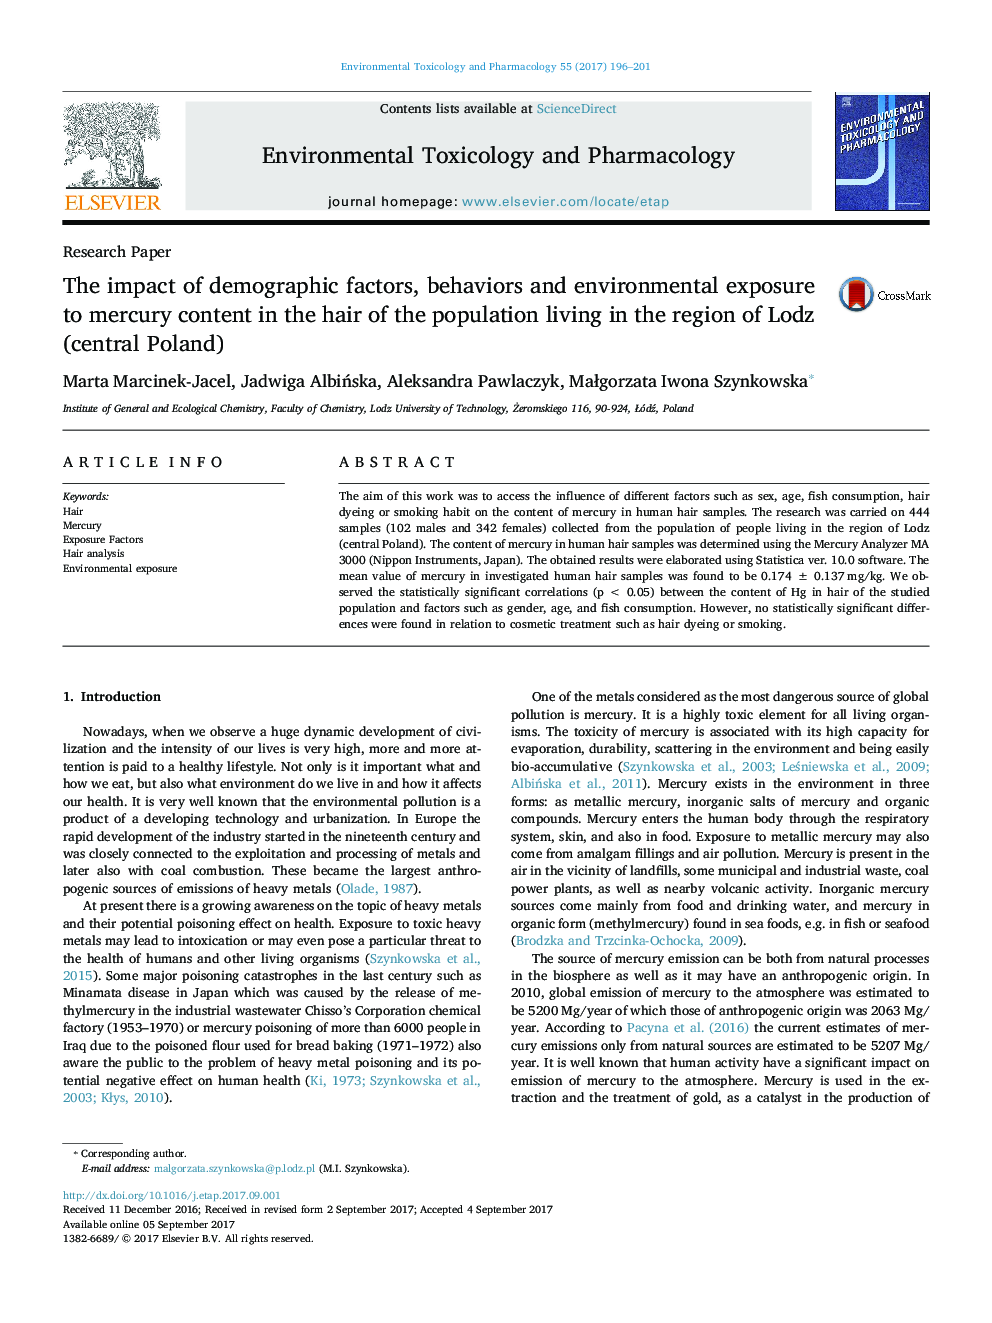 The impact of demographic factors, behaviors and environmental exposure to mercury content in the hair of the population living in the region of Lodz (central Poland)